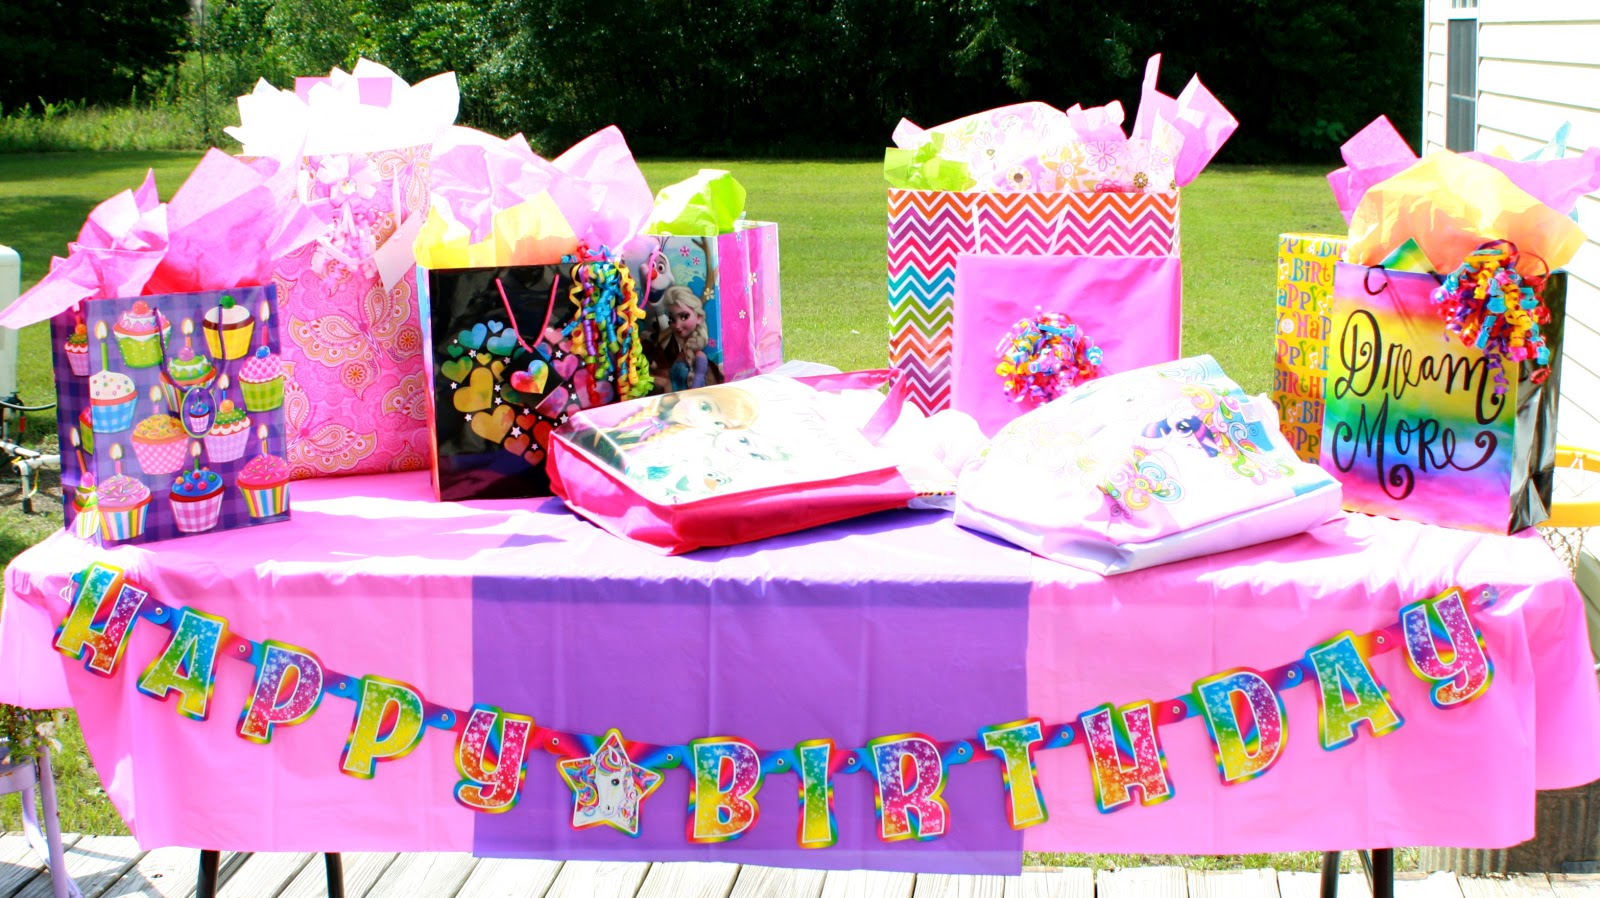 The Cozy Old Farmhouse: A 50¢ Makeover & a Lisa Frank 8th Birthday Party